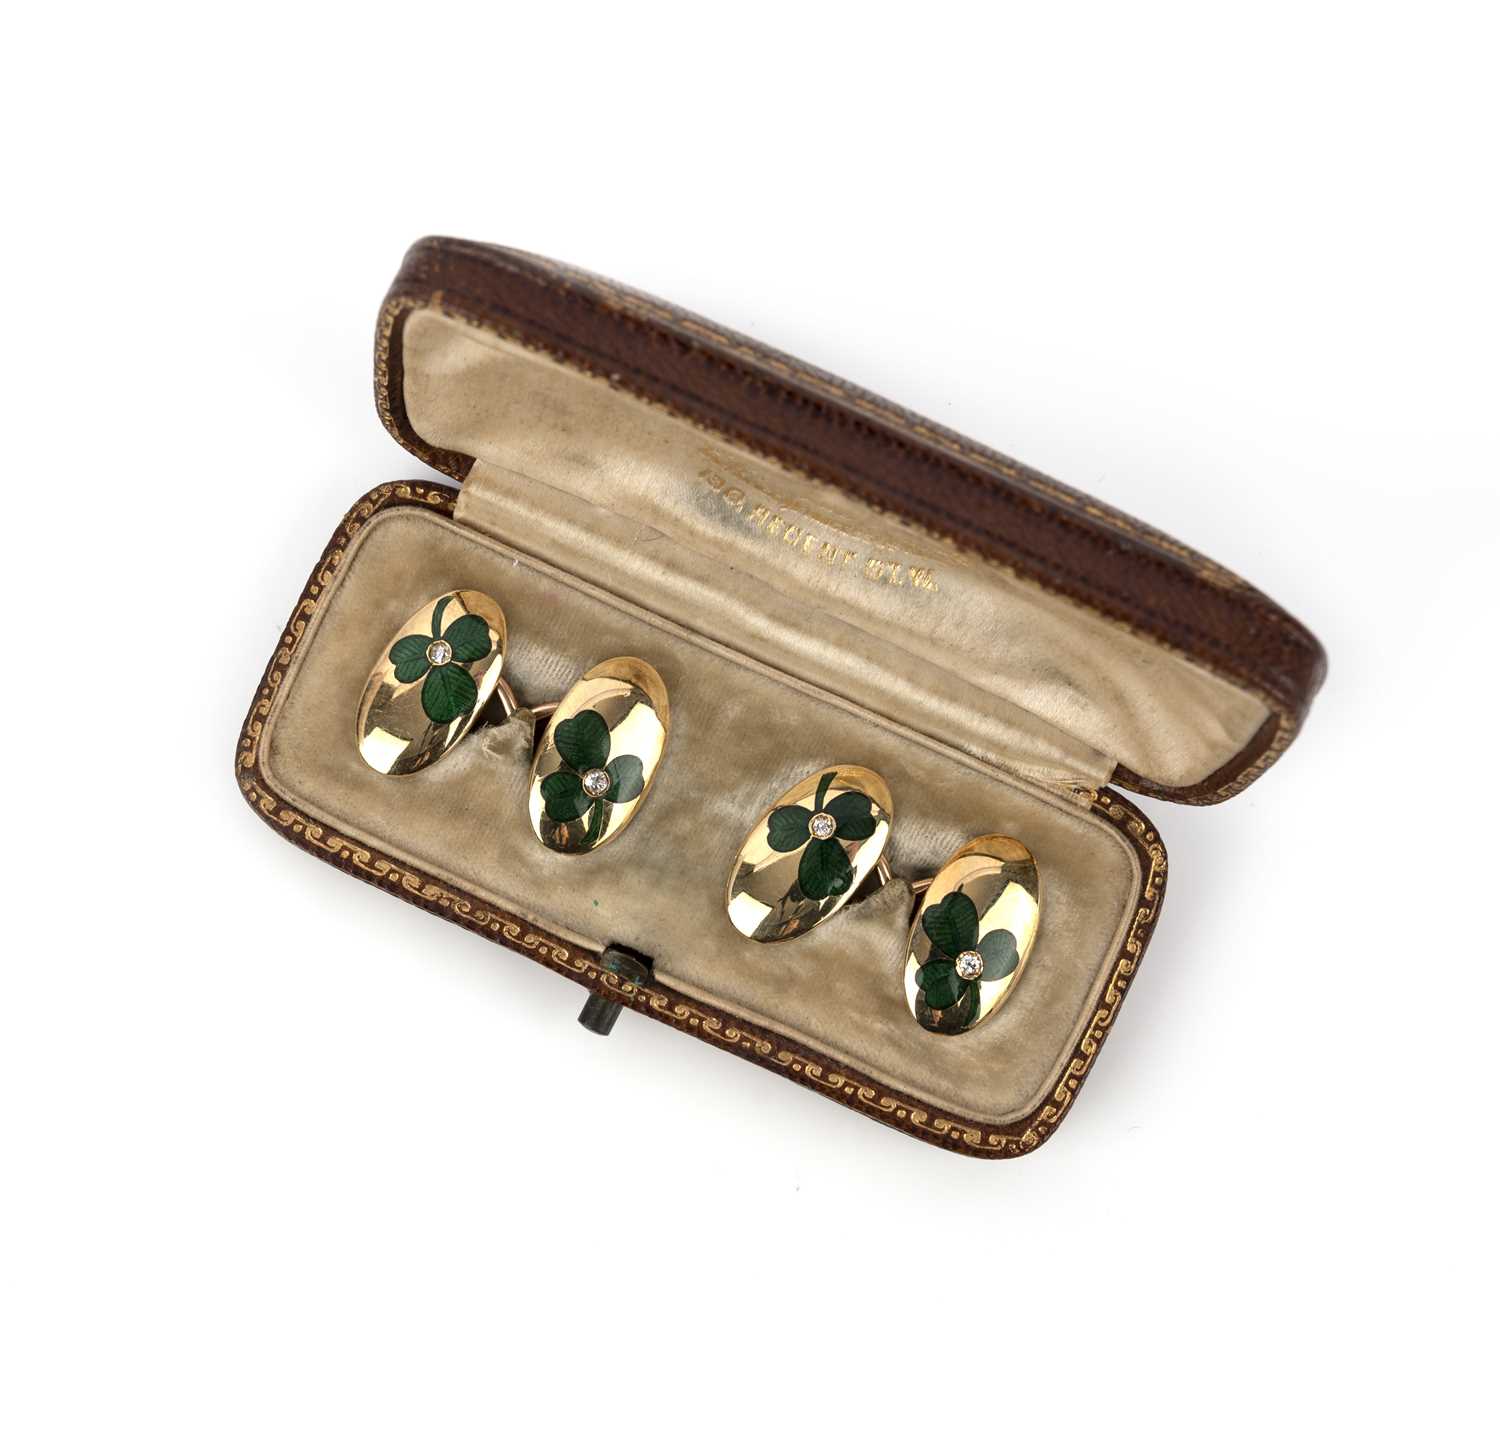 A pair of Edwardian gold cufflinks, each decorated with a green enamel shamrock set with a diamond - Image 2 of 2